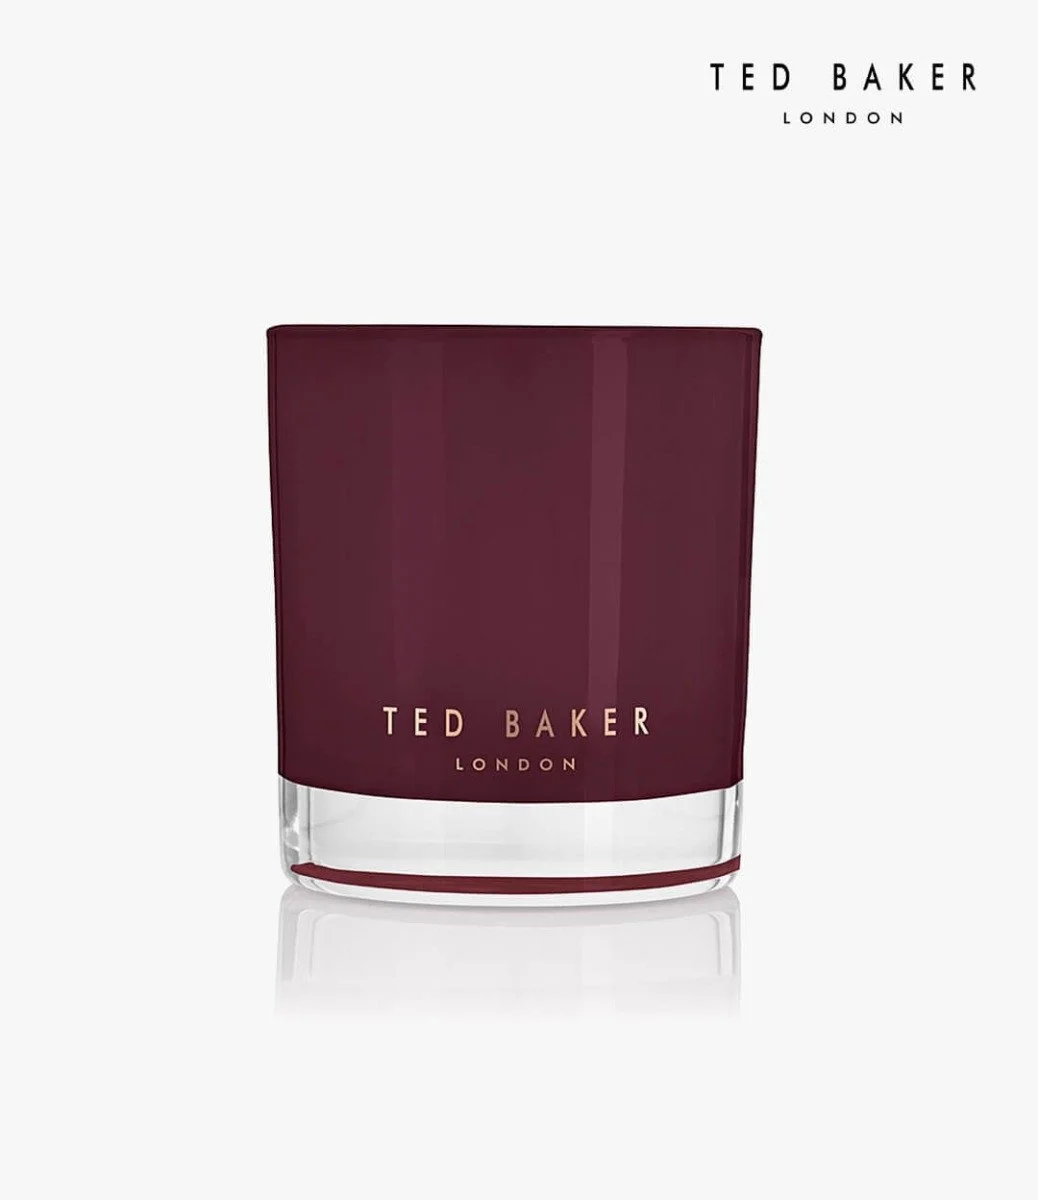  Pink Pepper & Cedarwood Scented Candle by Ted Baker